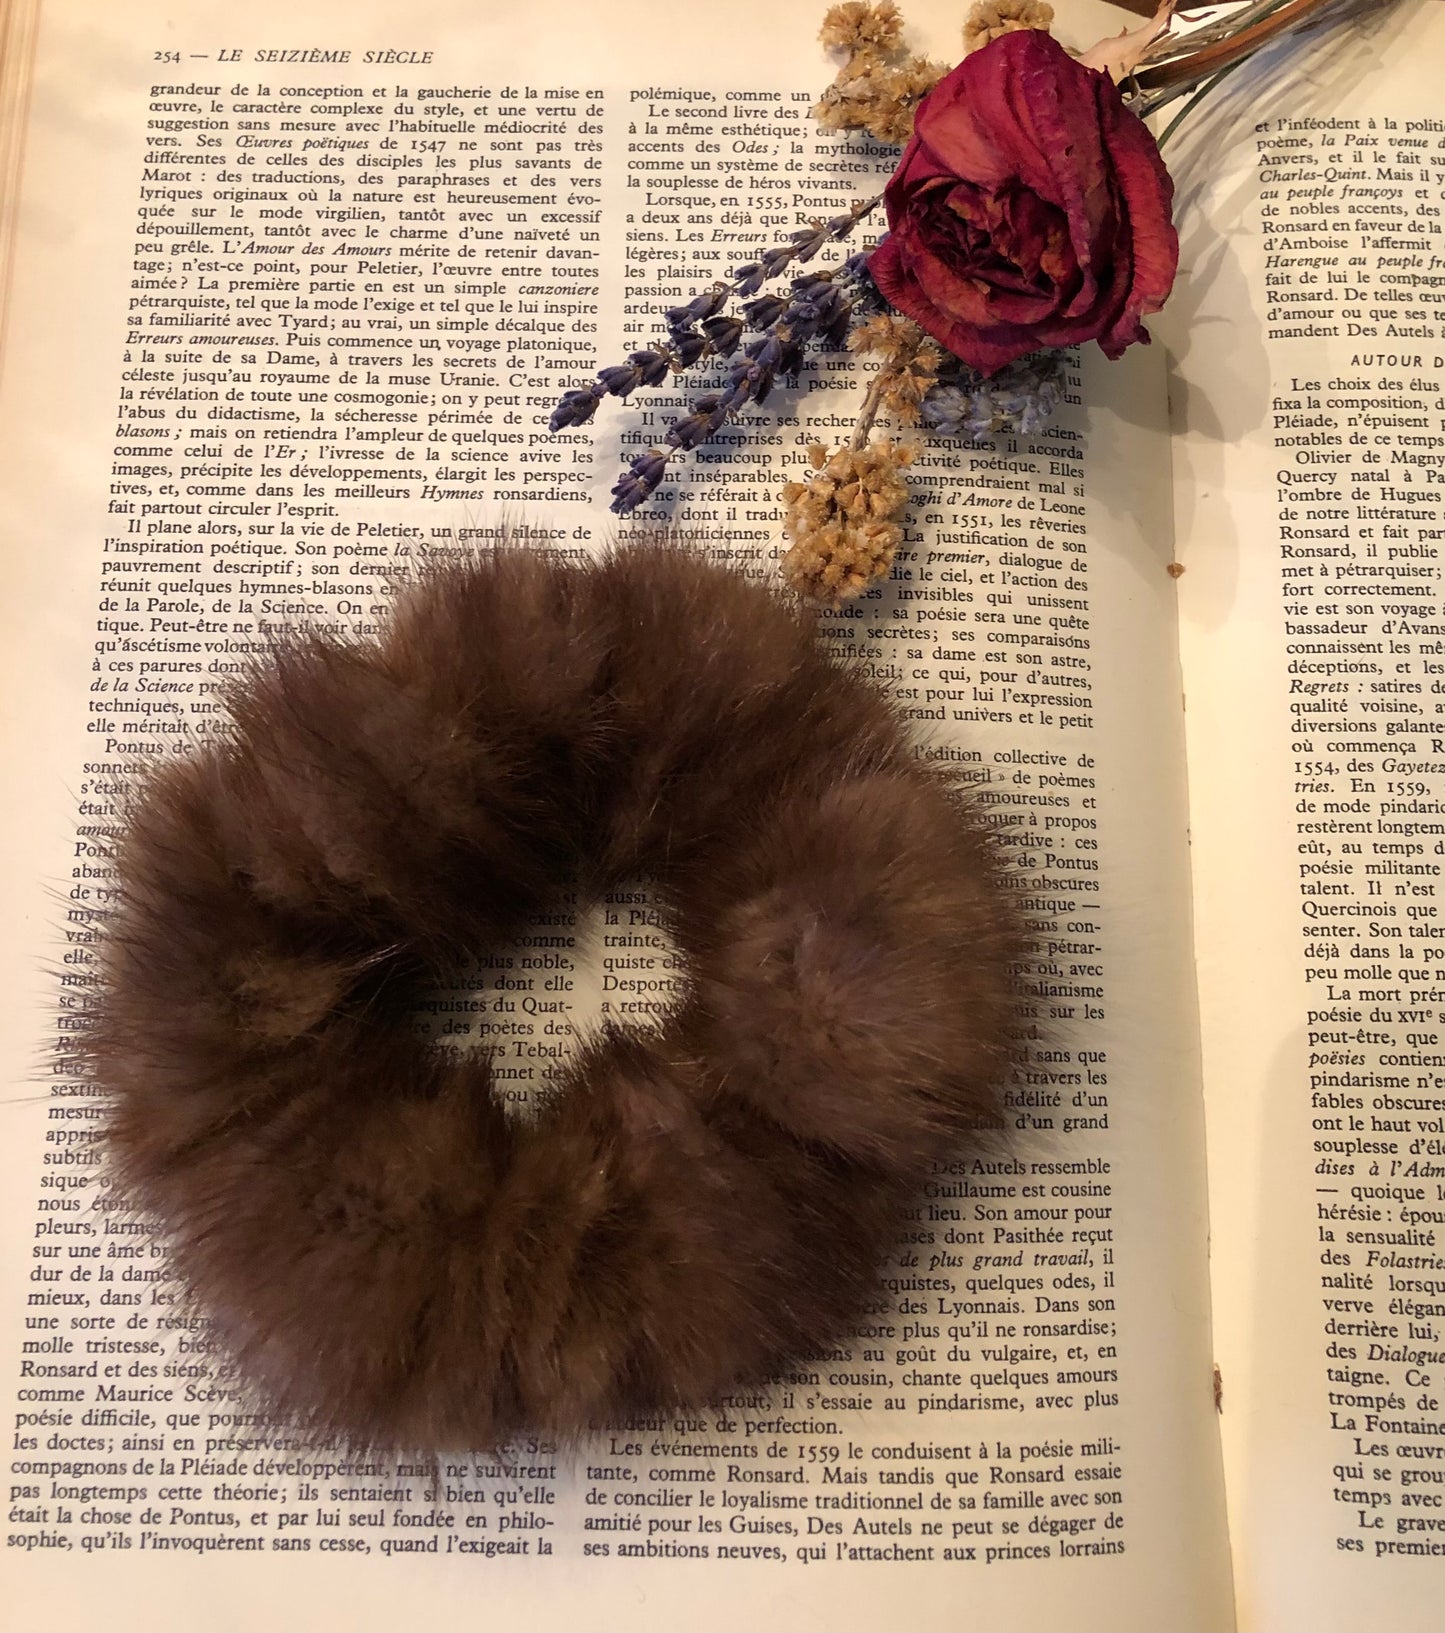 Recycled  mink Scrunchies